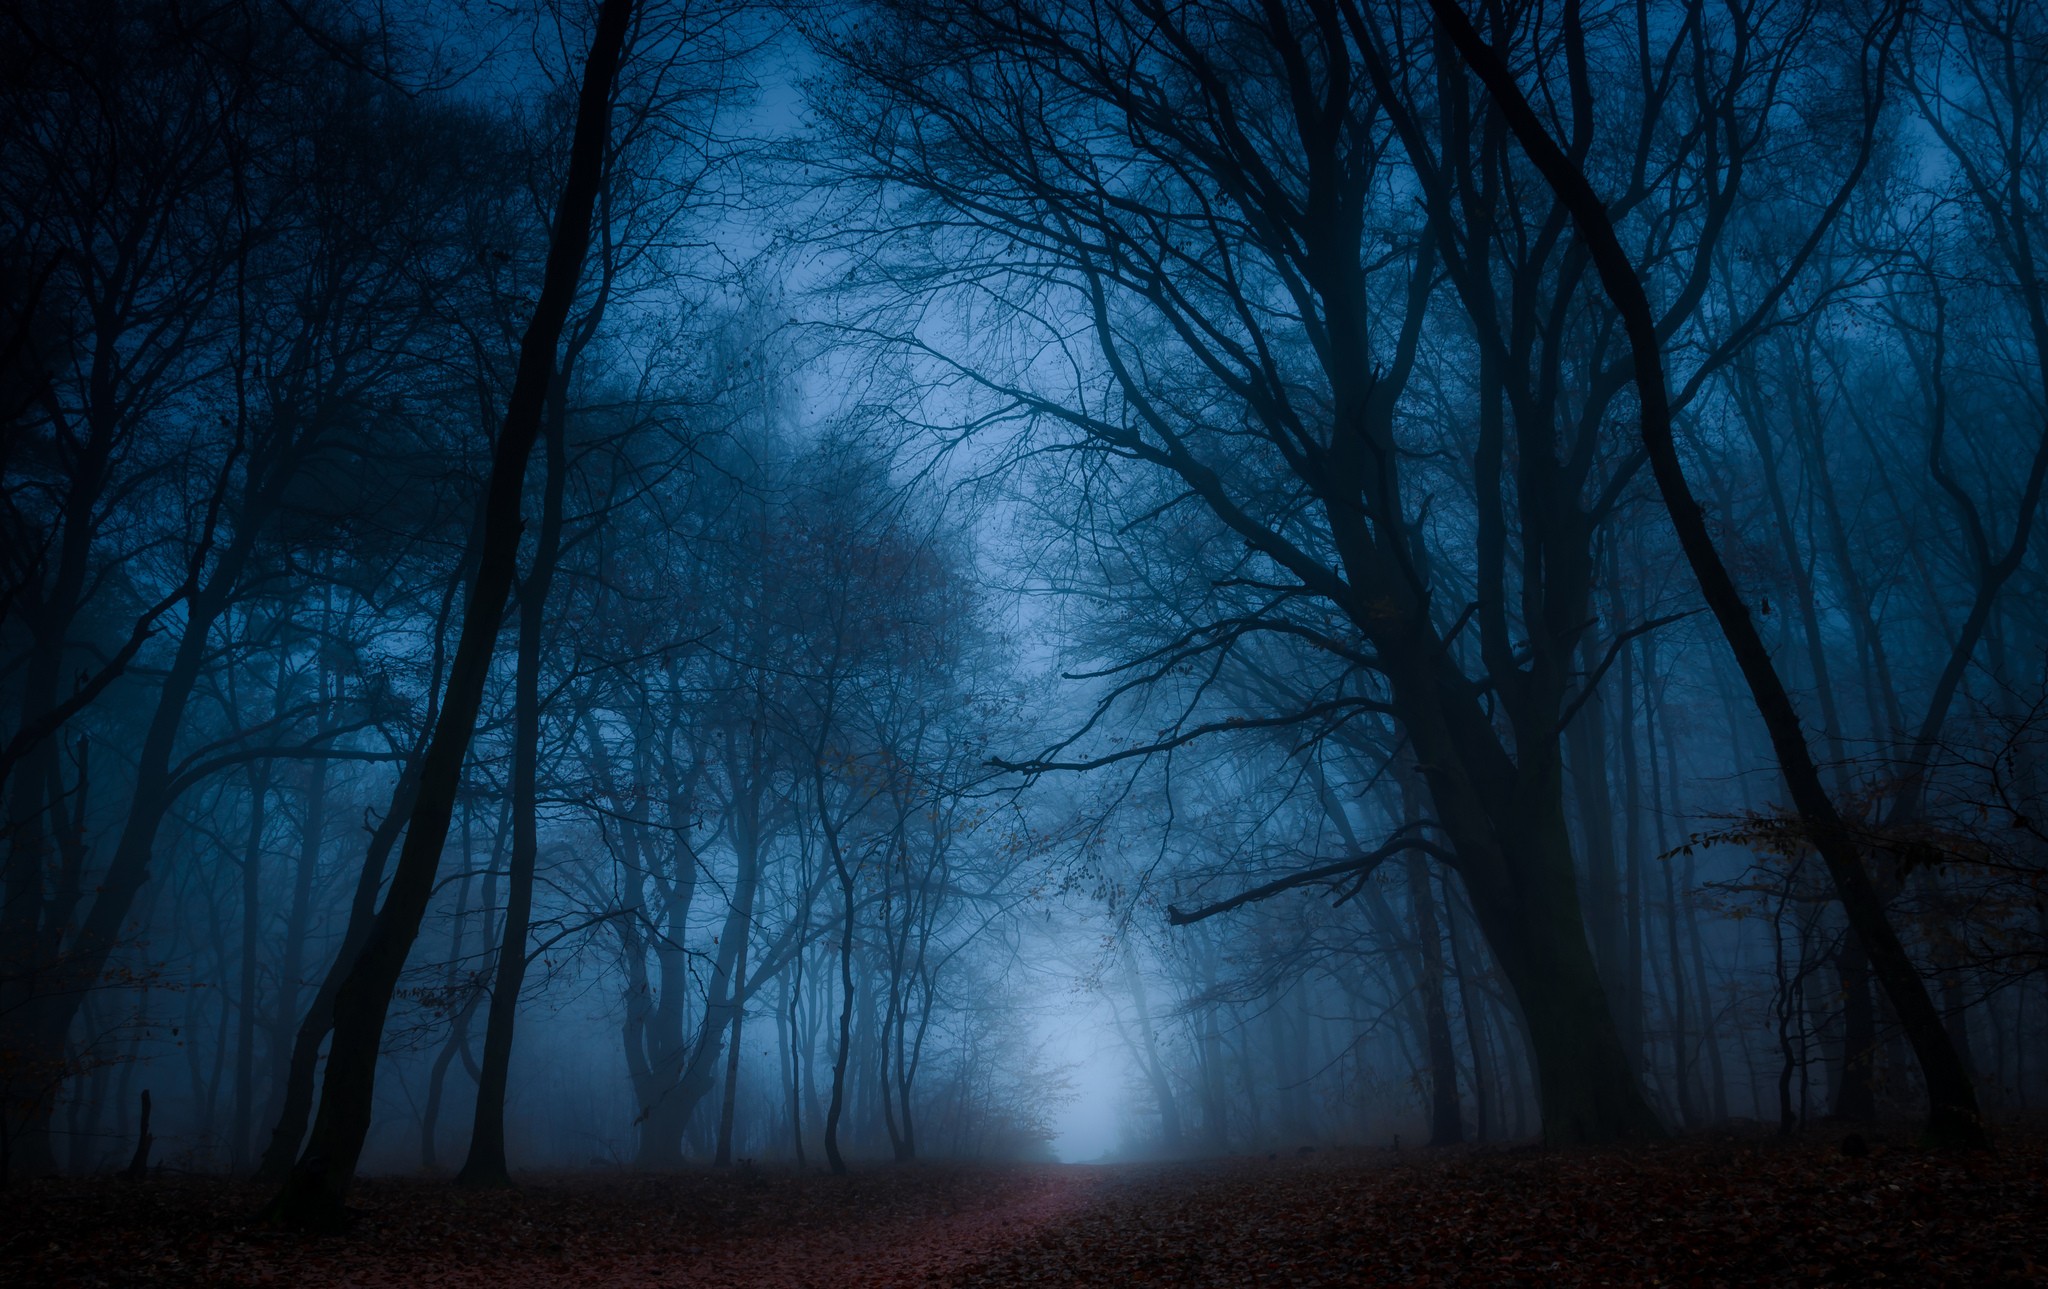 General 2048x1289 trees forest dark outdoors mist path fall blue nature spooky